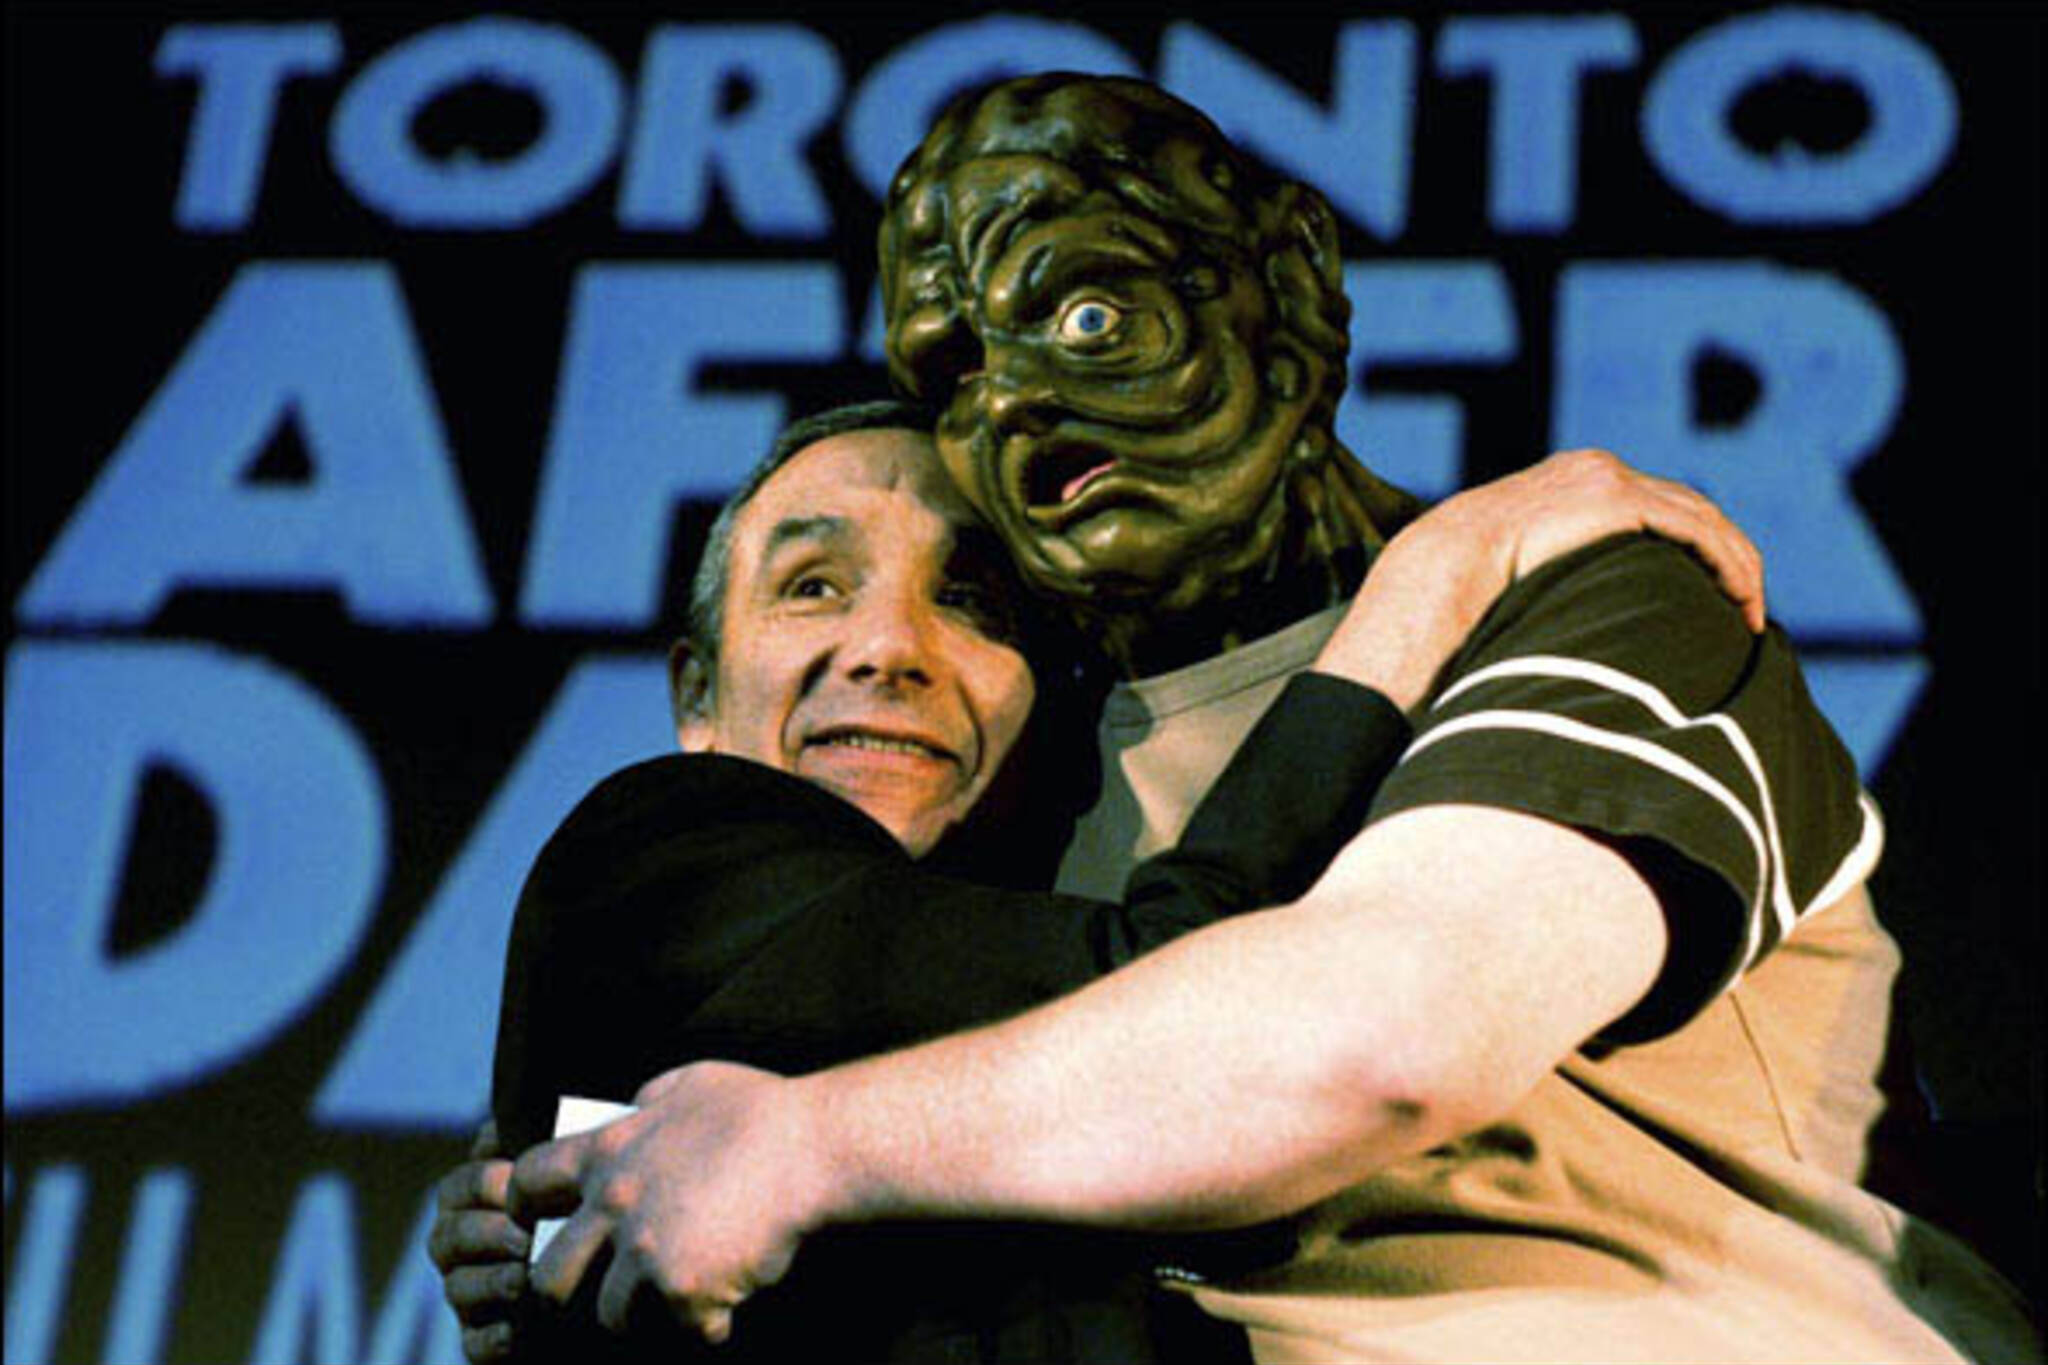 Director Lloyd Kaufman embraces a ghoulish creature on stage after the Toronto premiere screening of Poultrygeist: Night of the Chicken Dead at The Bloor Cinema during the Toronto After Dark Film Festival.